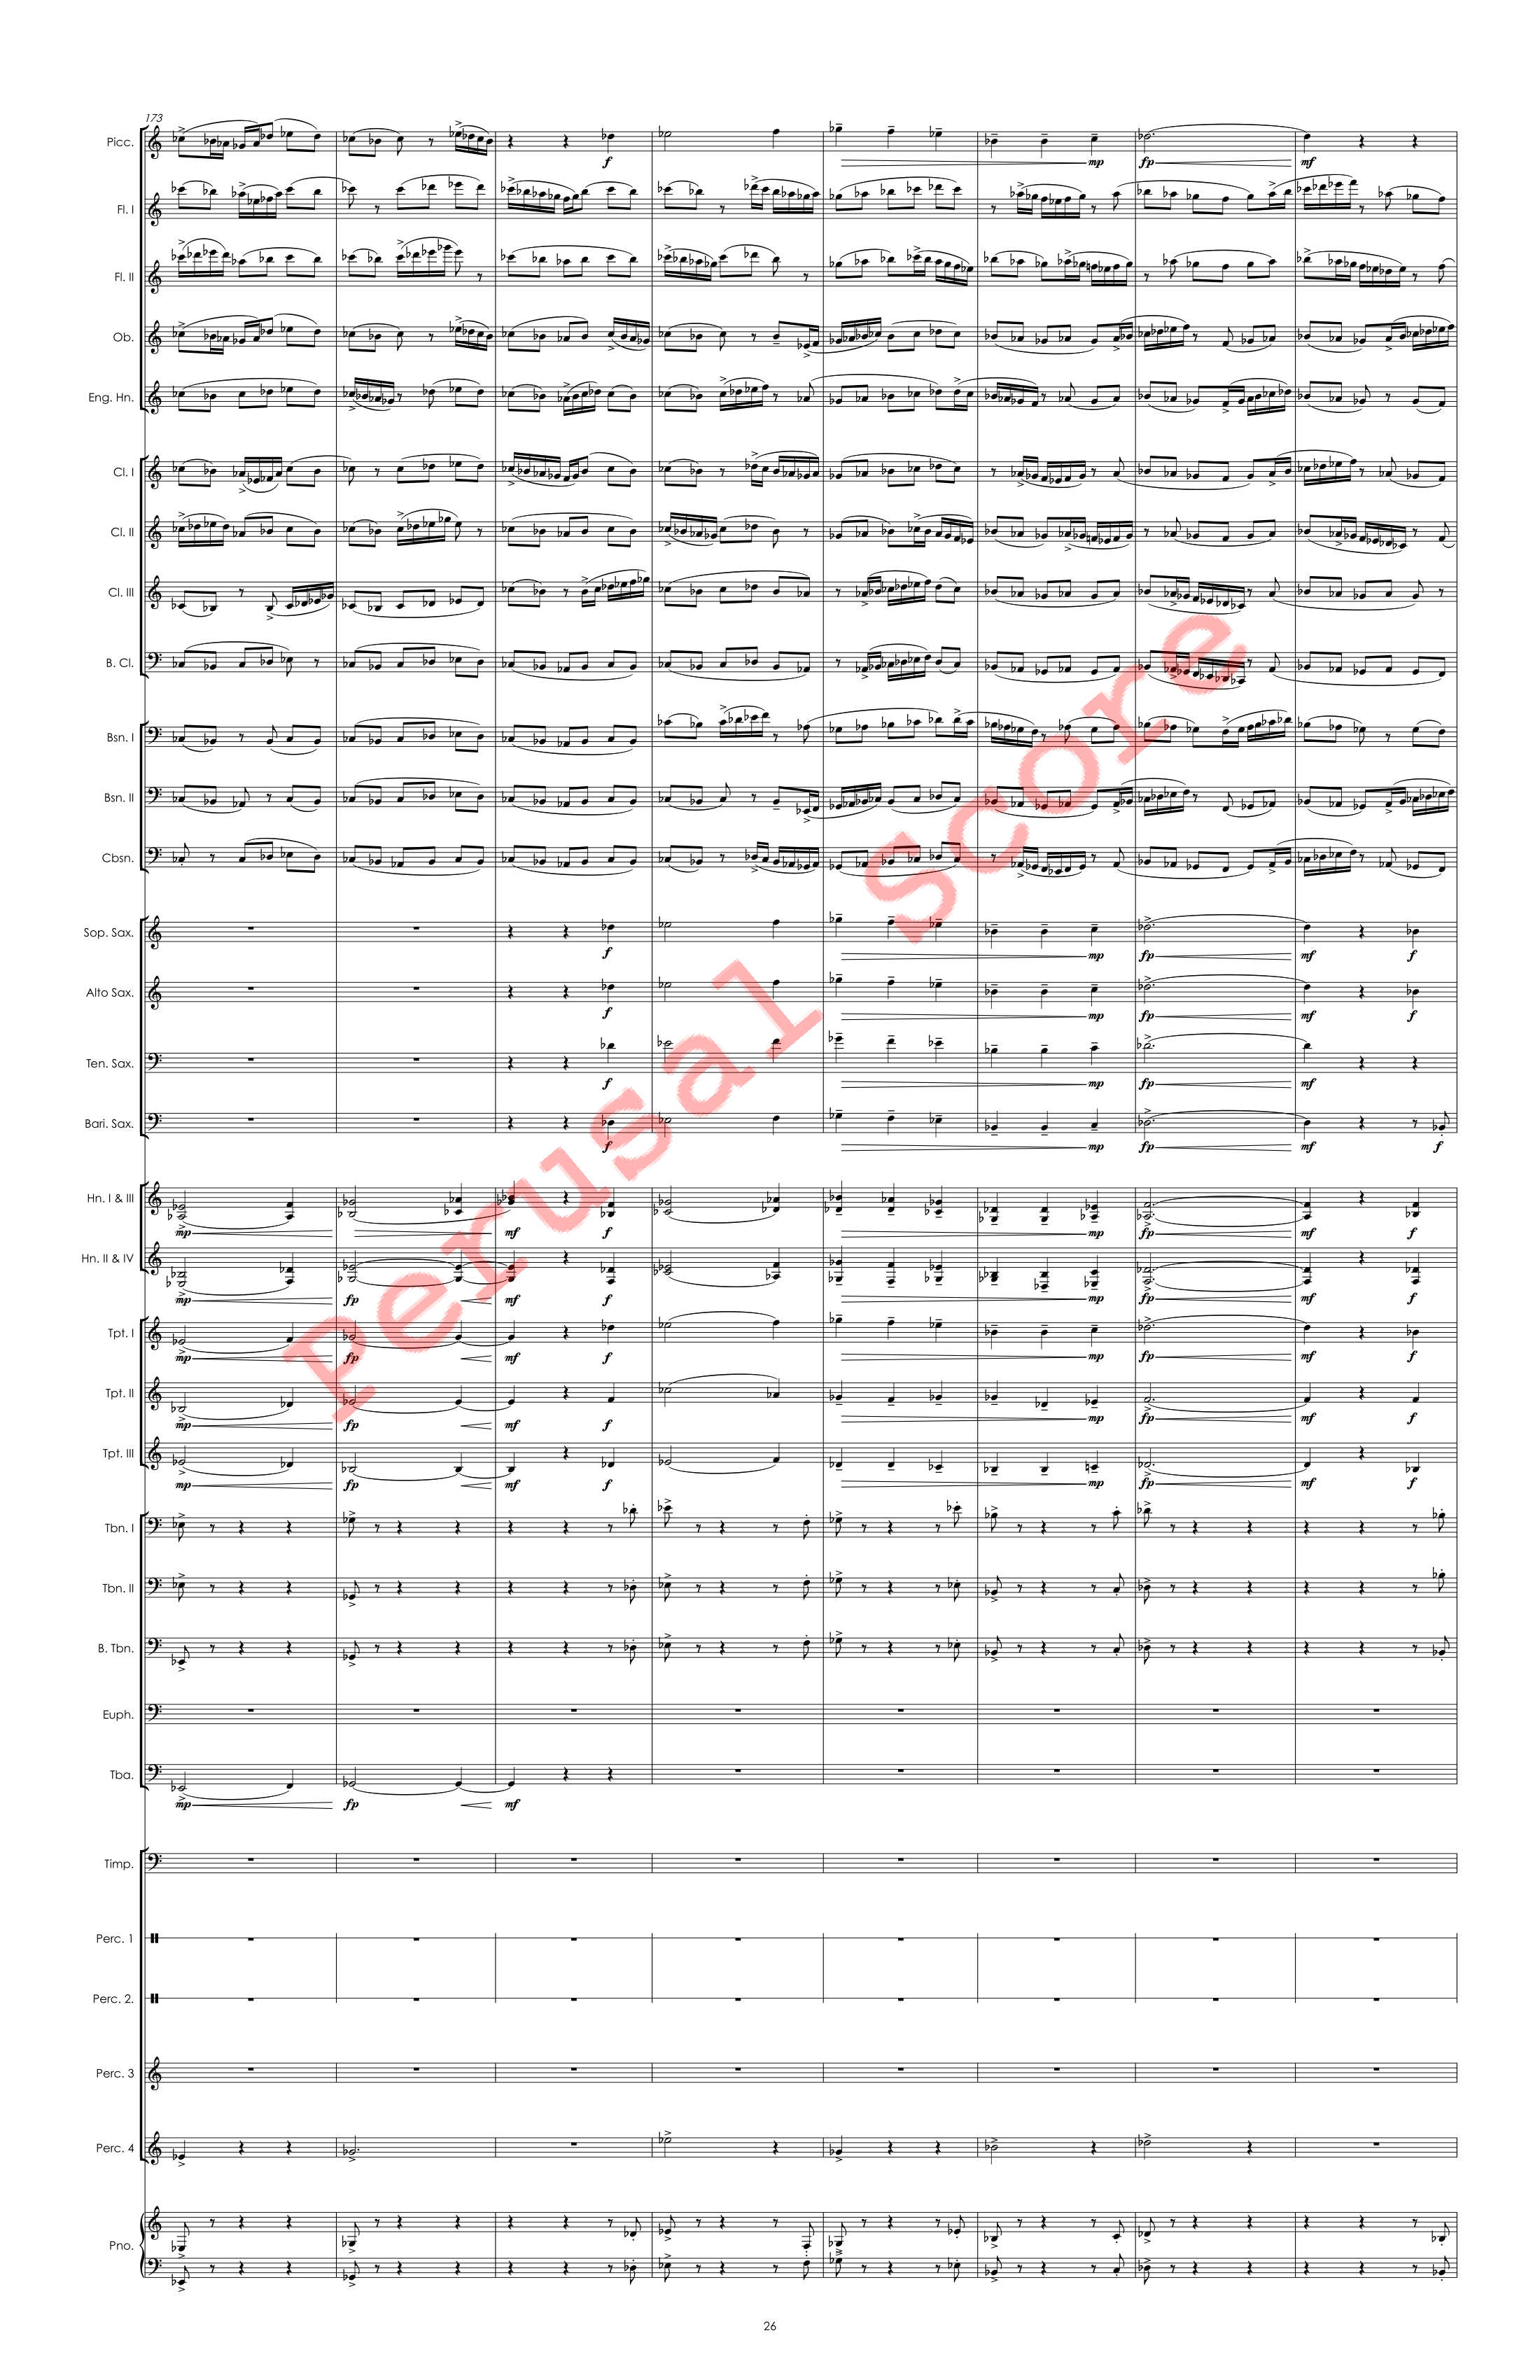 Canadian Folk Song - FINISHED 4.18.23- Full Score perusal score-26.png